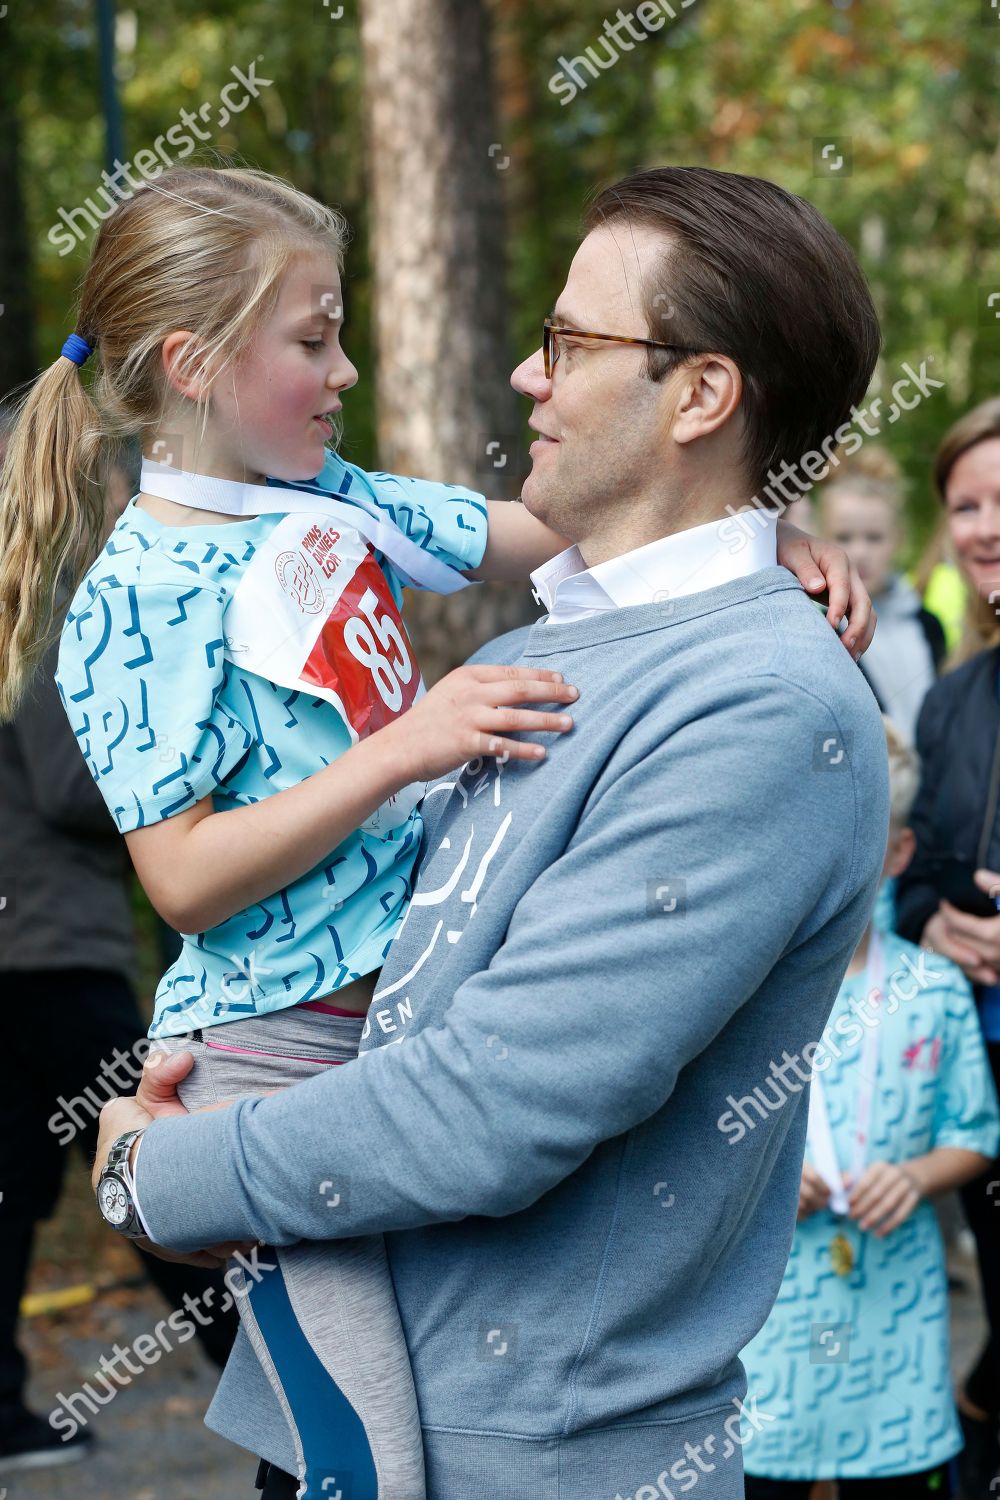 race-and-pep-day-stockholm-sweden-shutterstock-editorial-9884340ad.jpg